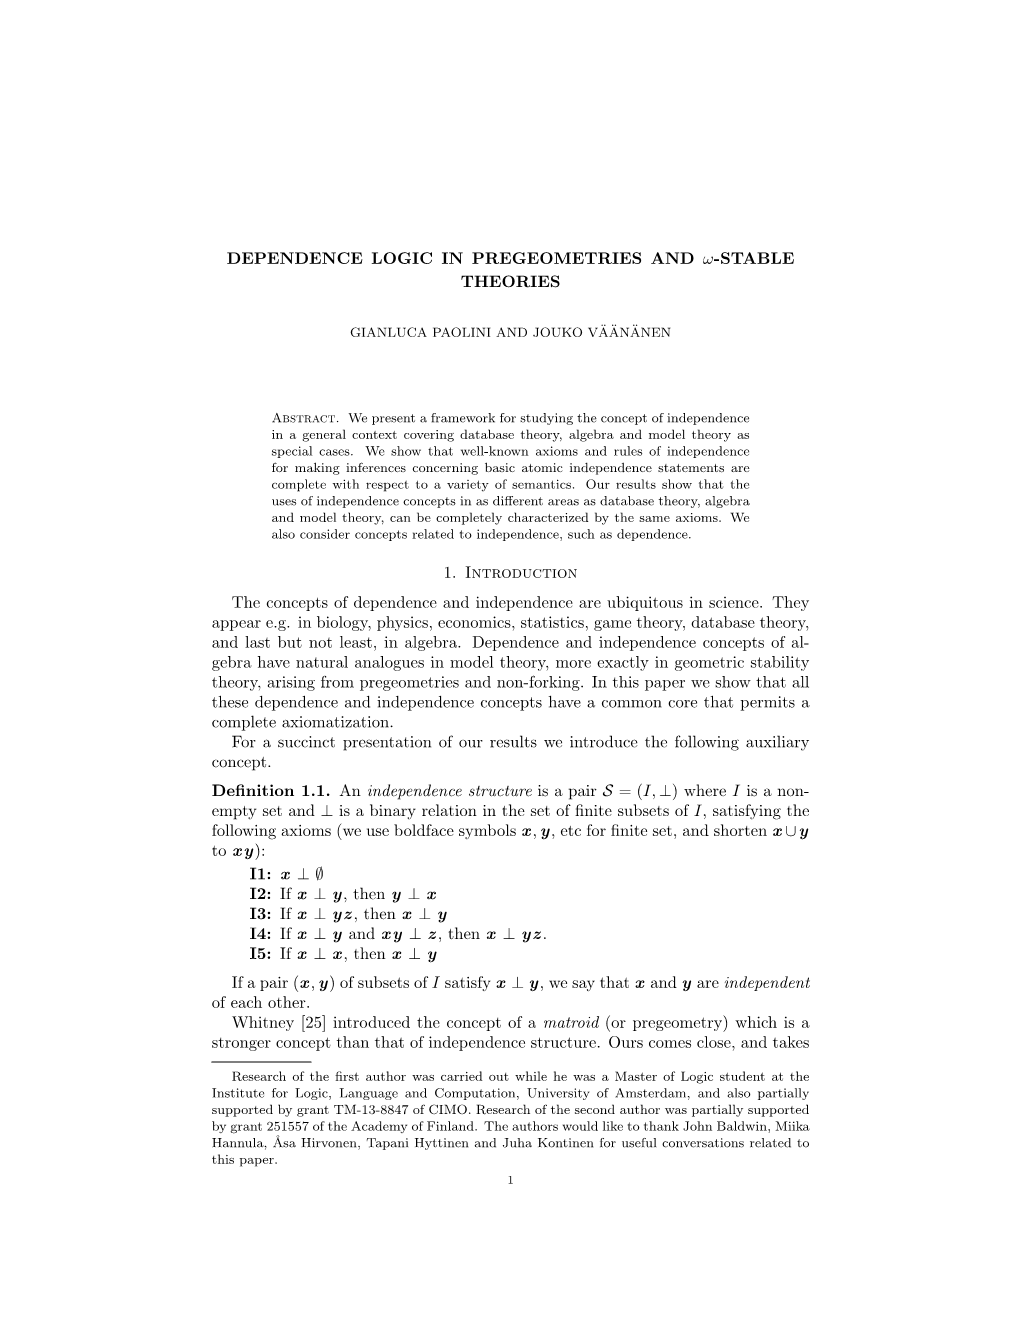 Dependence Logic in Pregeometries and Omega-Stable Theories